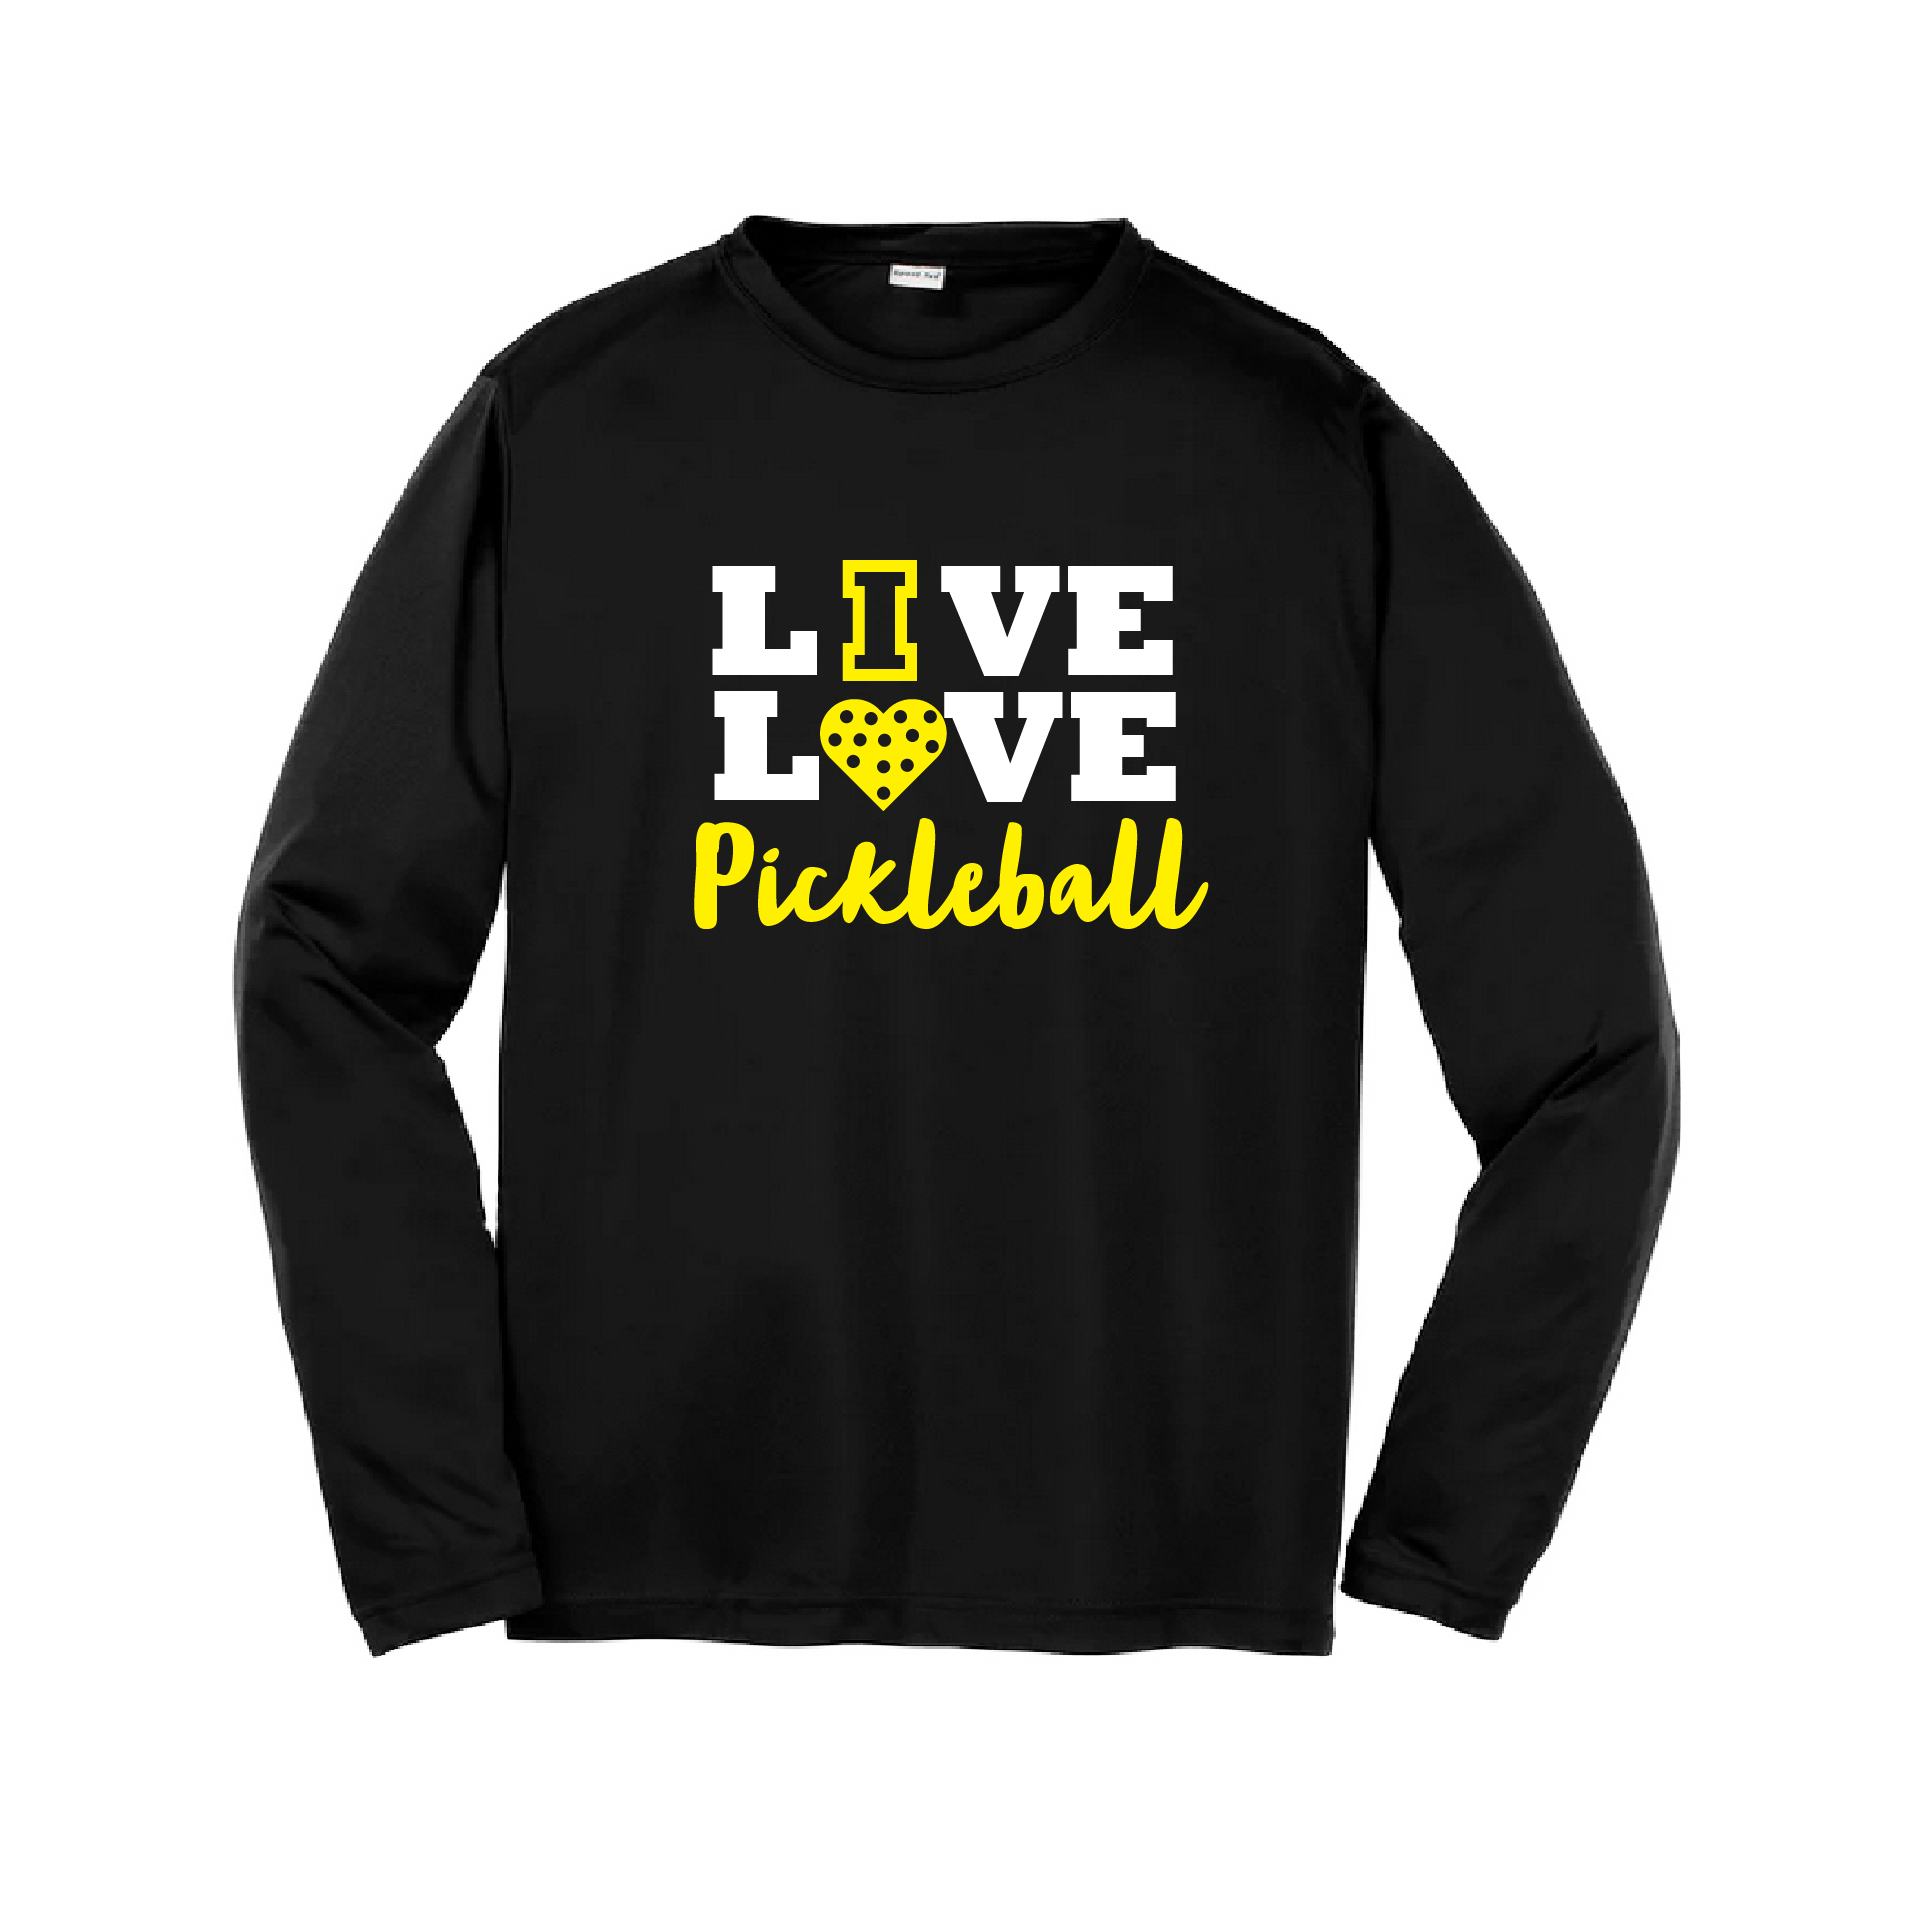 Pickleball Design: Live Love Pickleball  Youth Style: Long Sleeve  Shirts are lightweight, roomy and highly breathable. These moisture-wicking shirts are designed for athletic performance. They feature PosiCharge technology to lock in color and prevent logos from fading. Removable tag and set-in sleeves for comfort